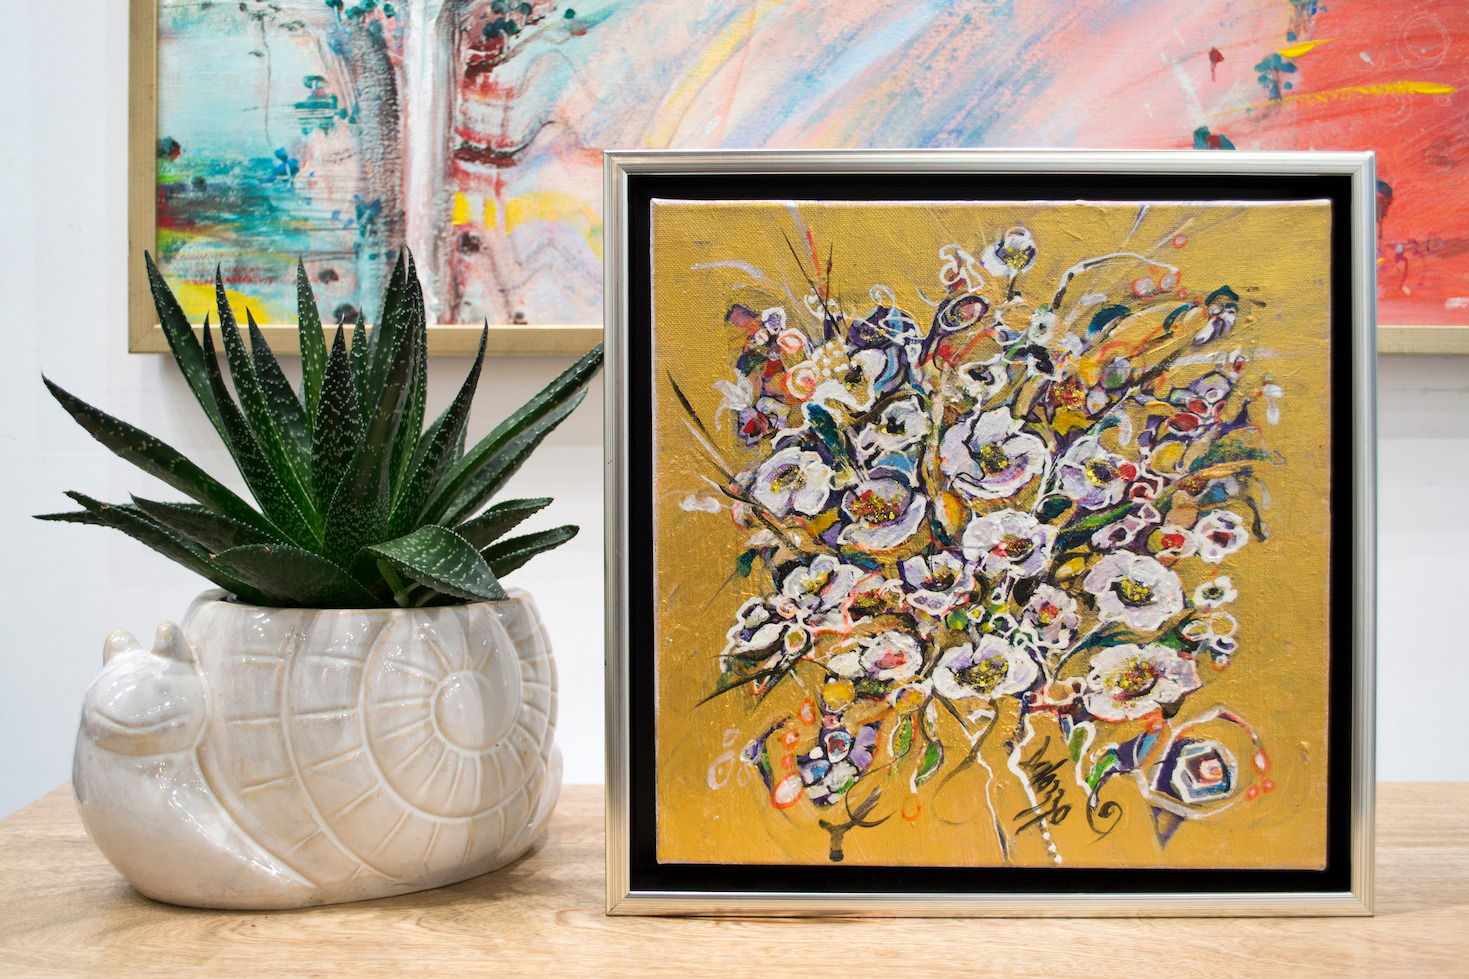 Wall Design Ideas With Still Life Painting "Wild Flowers Golden" By Lucette Dalozzo